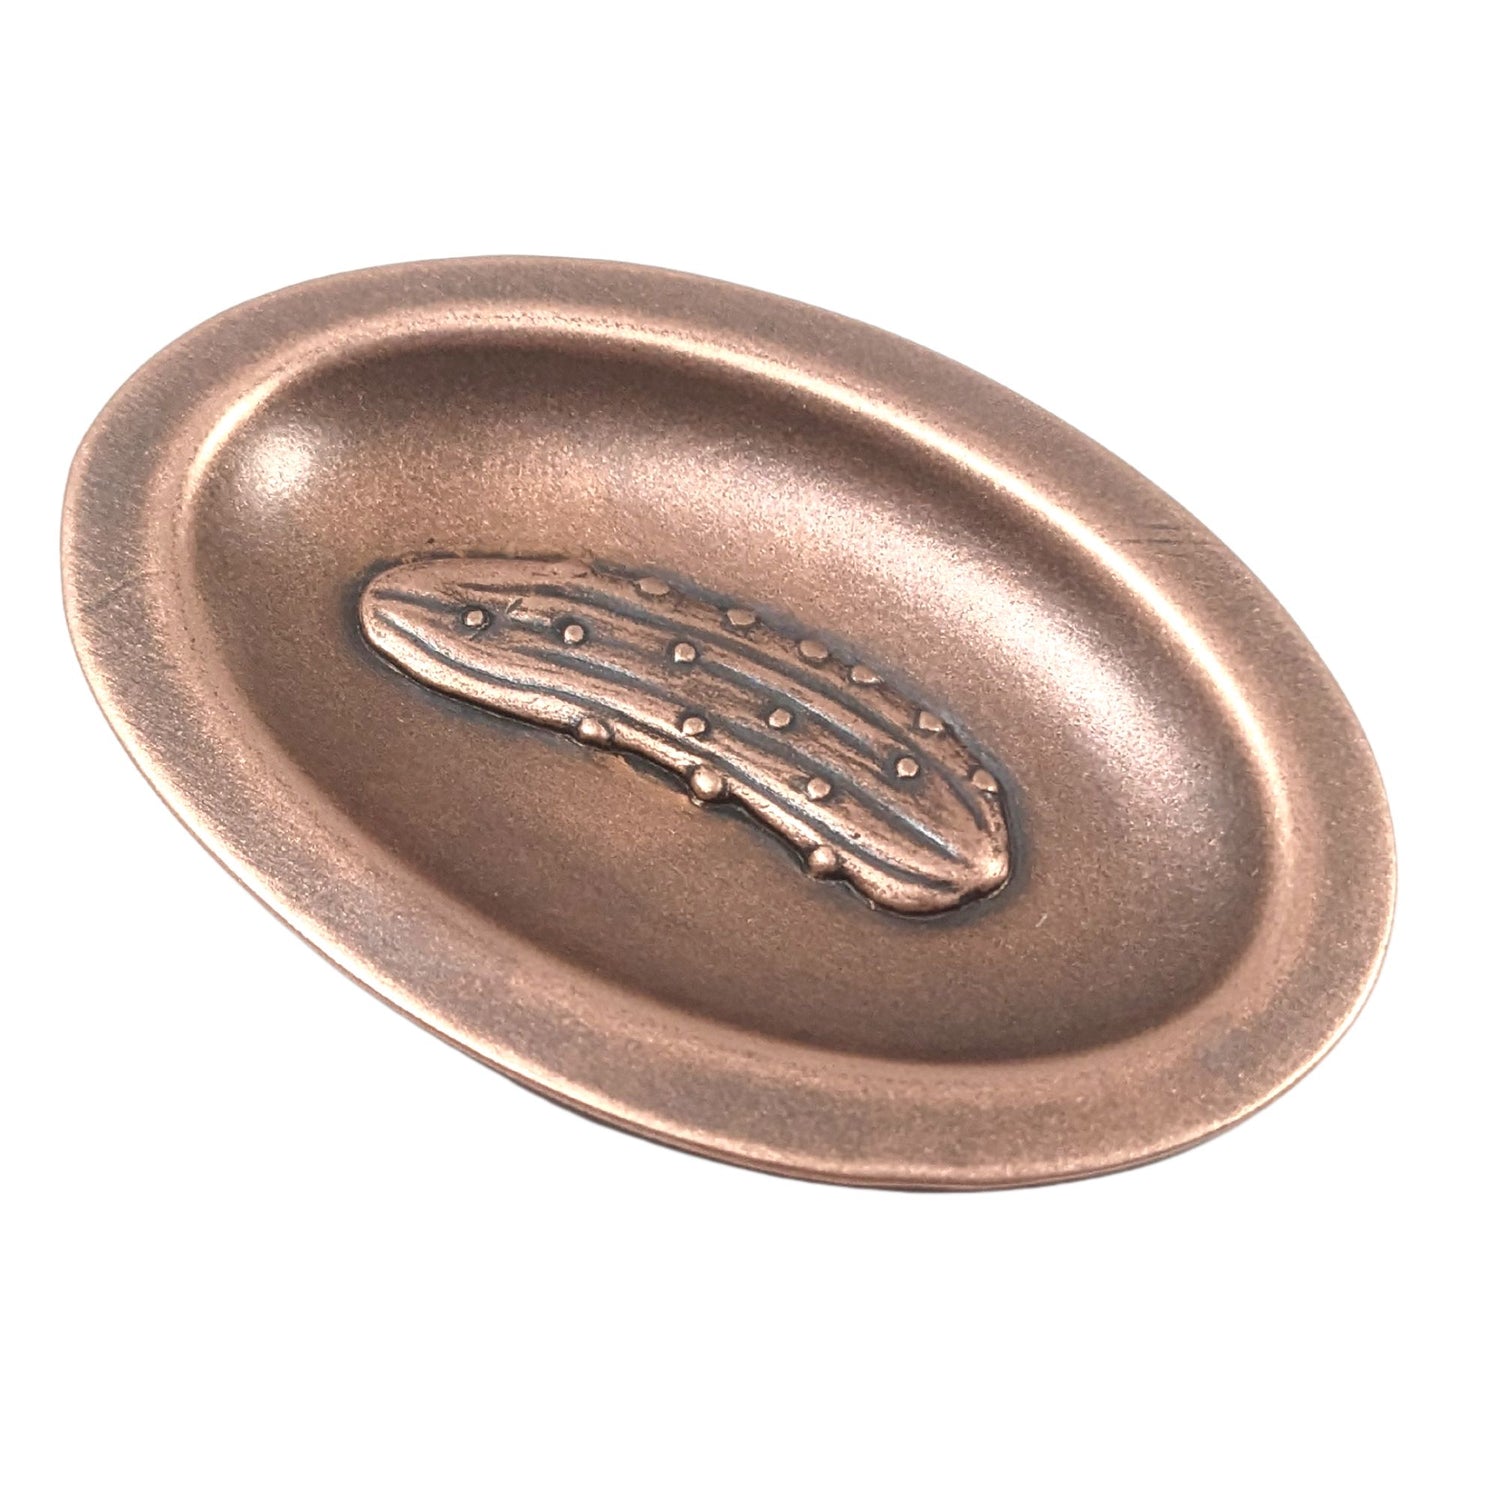 Oval ring dish made of copper. The dish has a shallow bowl with a lip around the edge. Centered on the bottom of the dish is a three-dimensional design of a pickle, also made of copper. The pickle is large and has stipples and ridges, just like a fresh from the garden pickle would have.  The design is oxidized, which means the recessed parts of the pickle are dark, almost black.